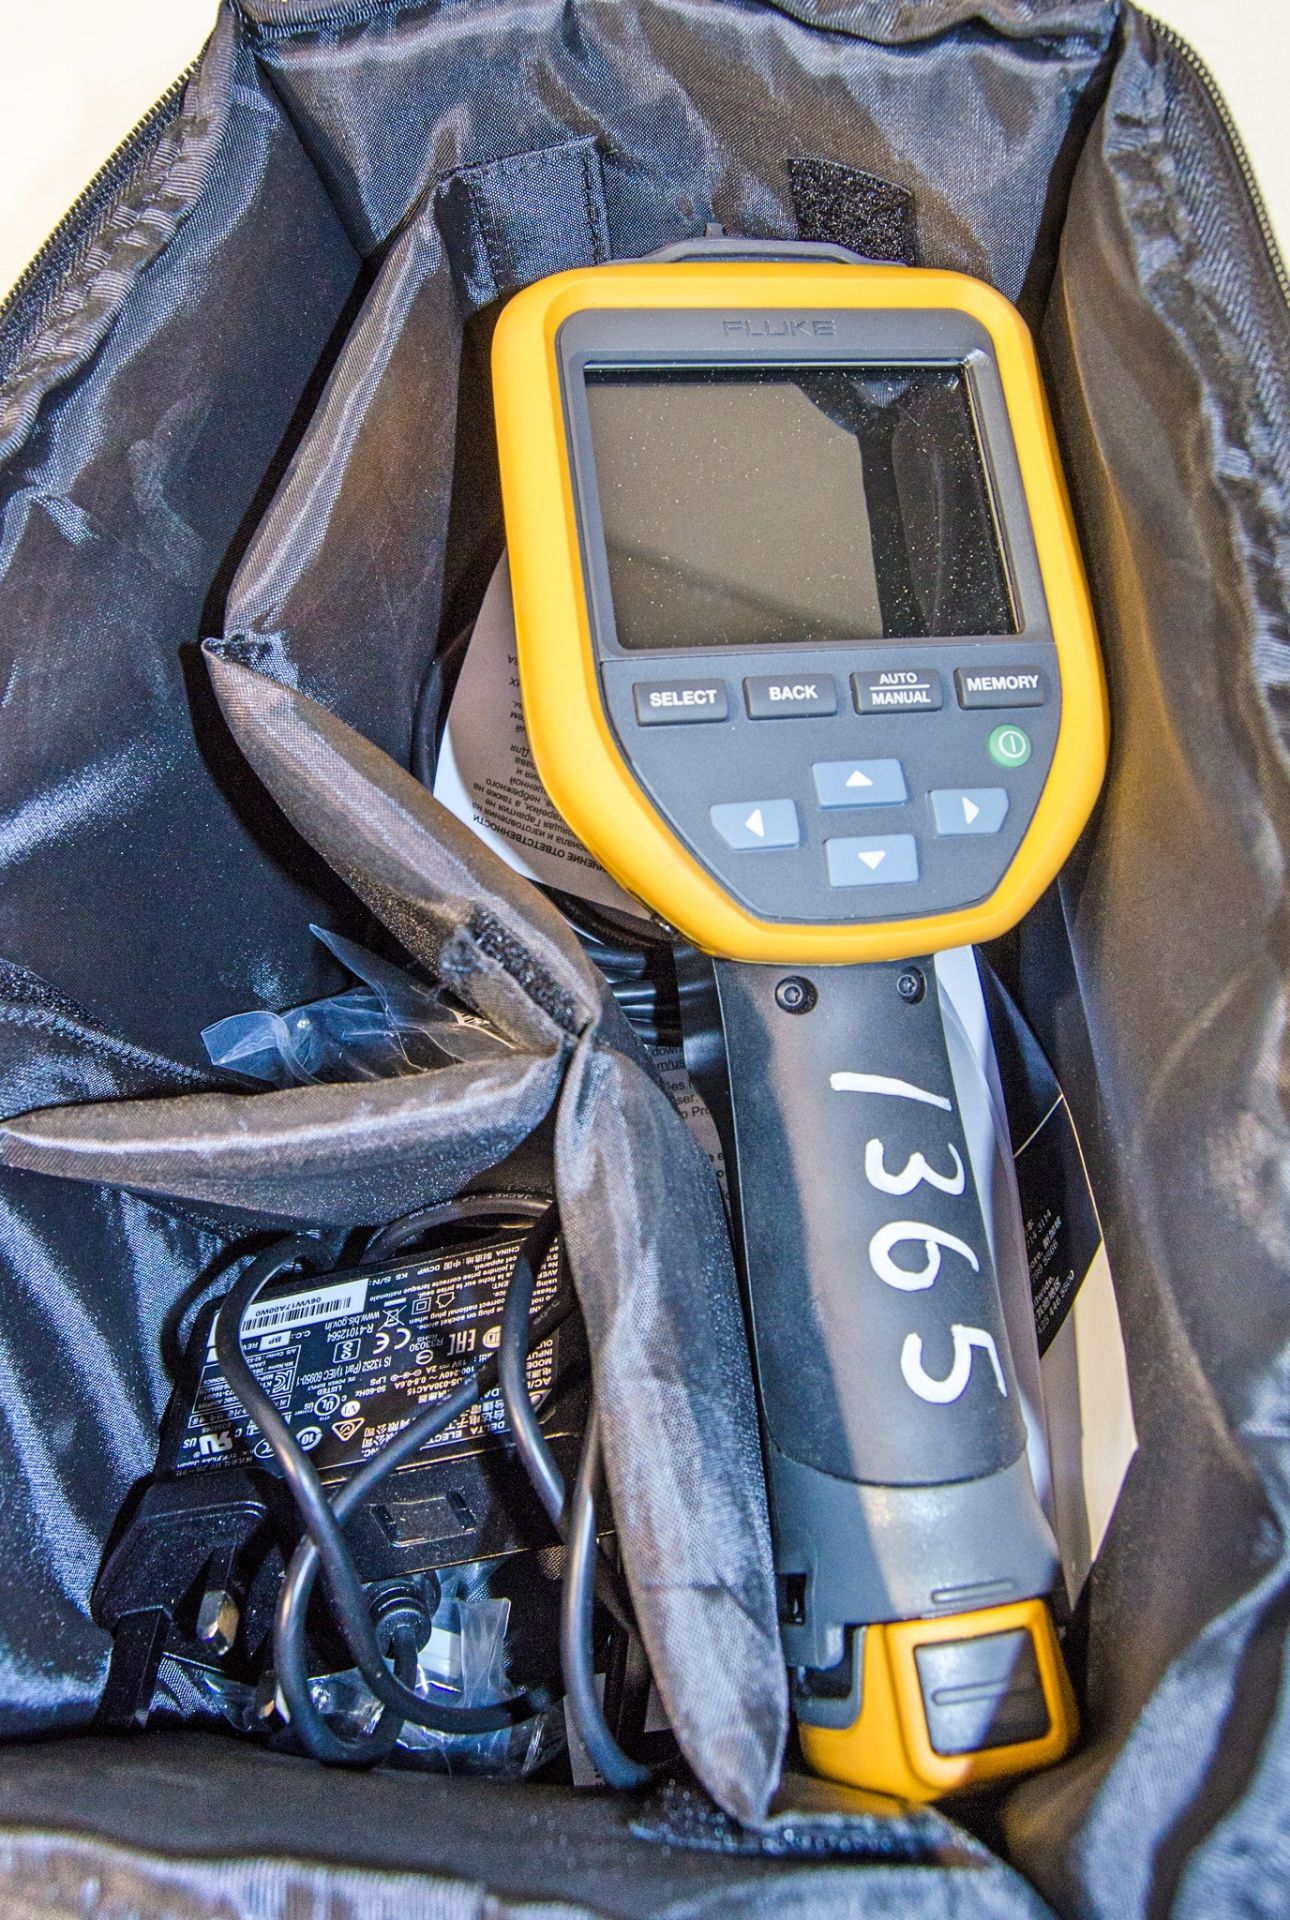 Fluke Tis20+ thermal imager c/w battery, charger & carry case